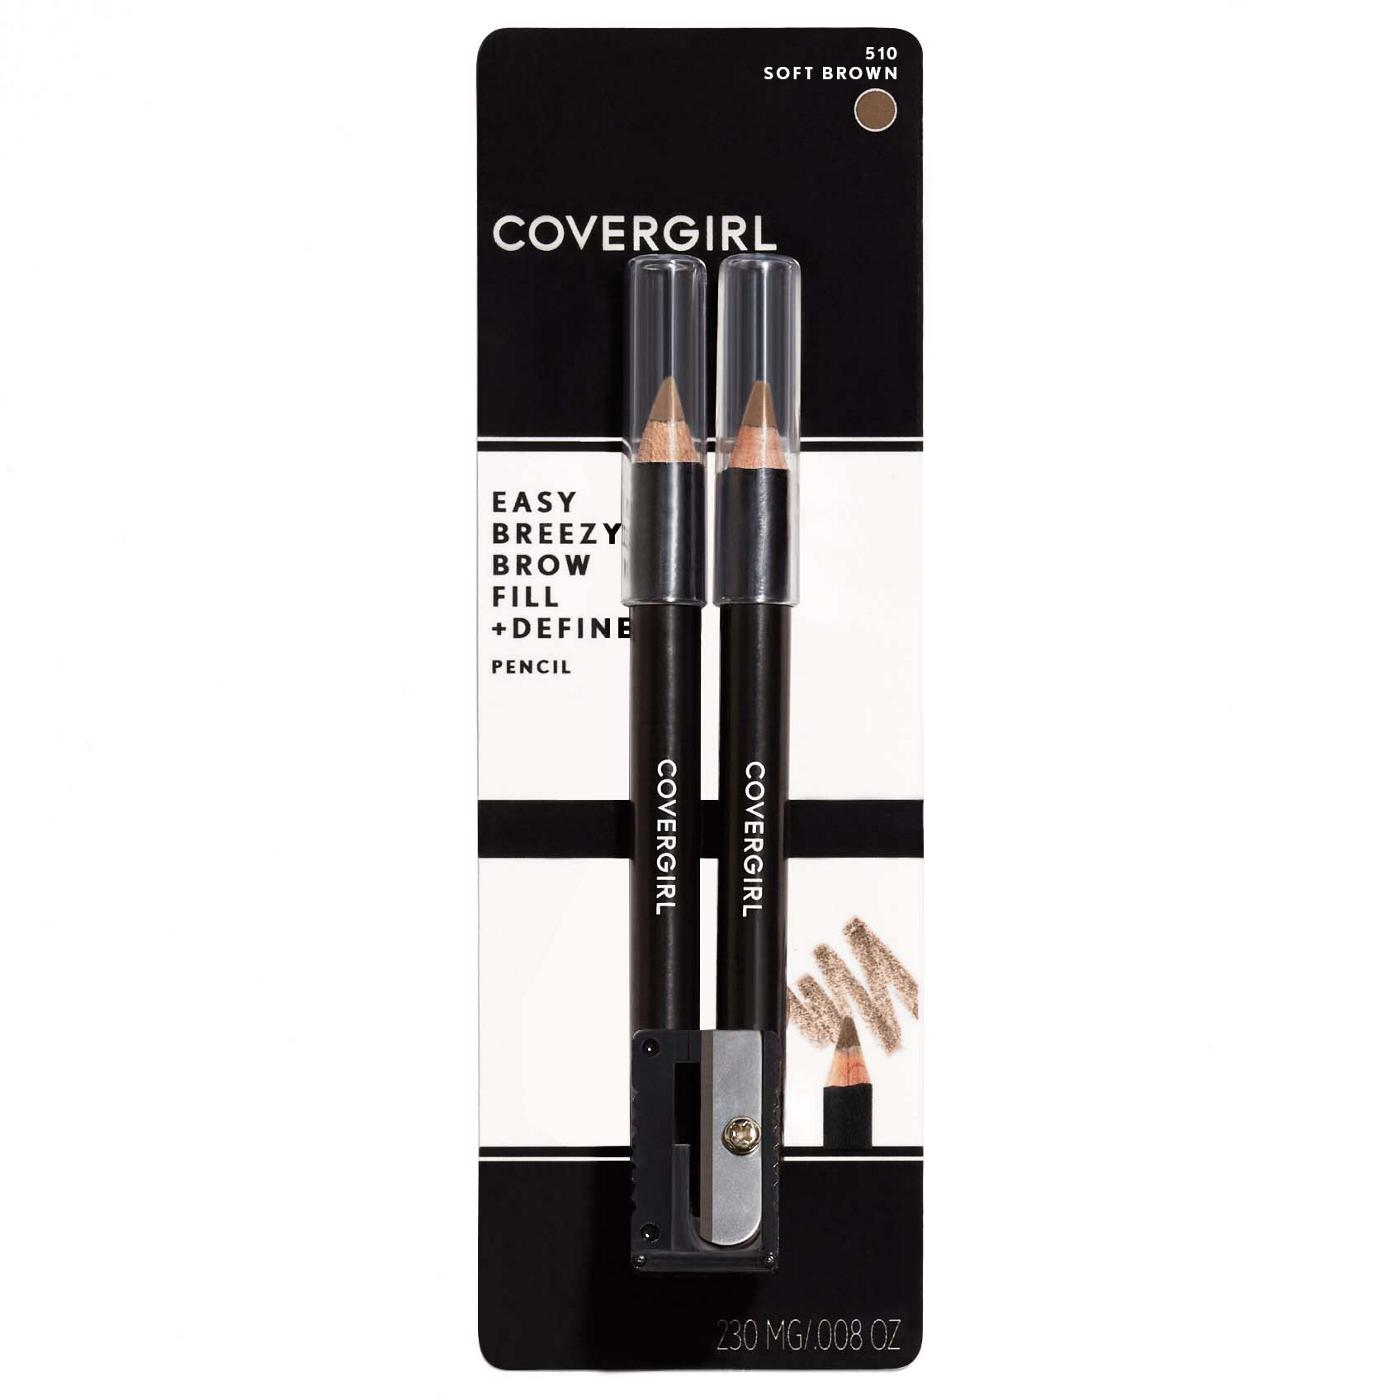 Covergirl Easy Breezy Brow Fill + Define Pencils 510 Soft Brown; image 1 of 4